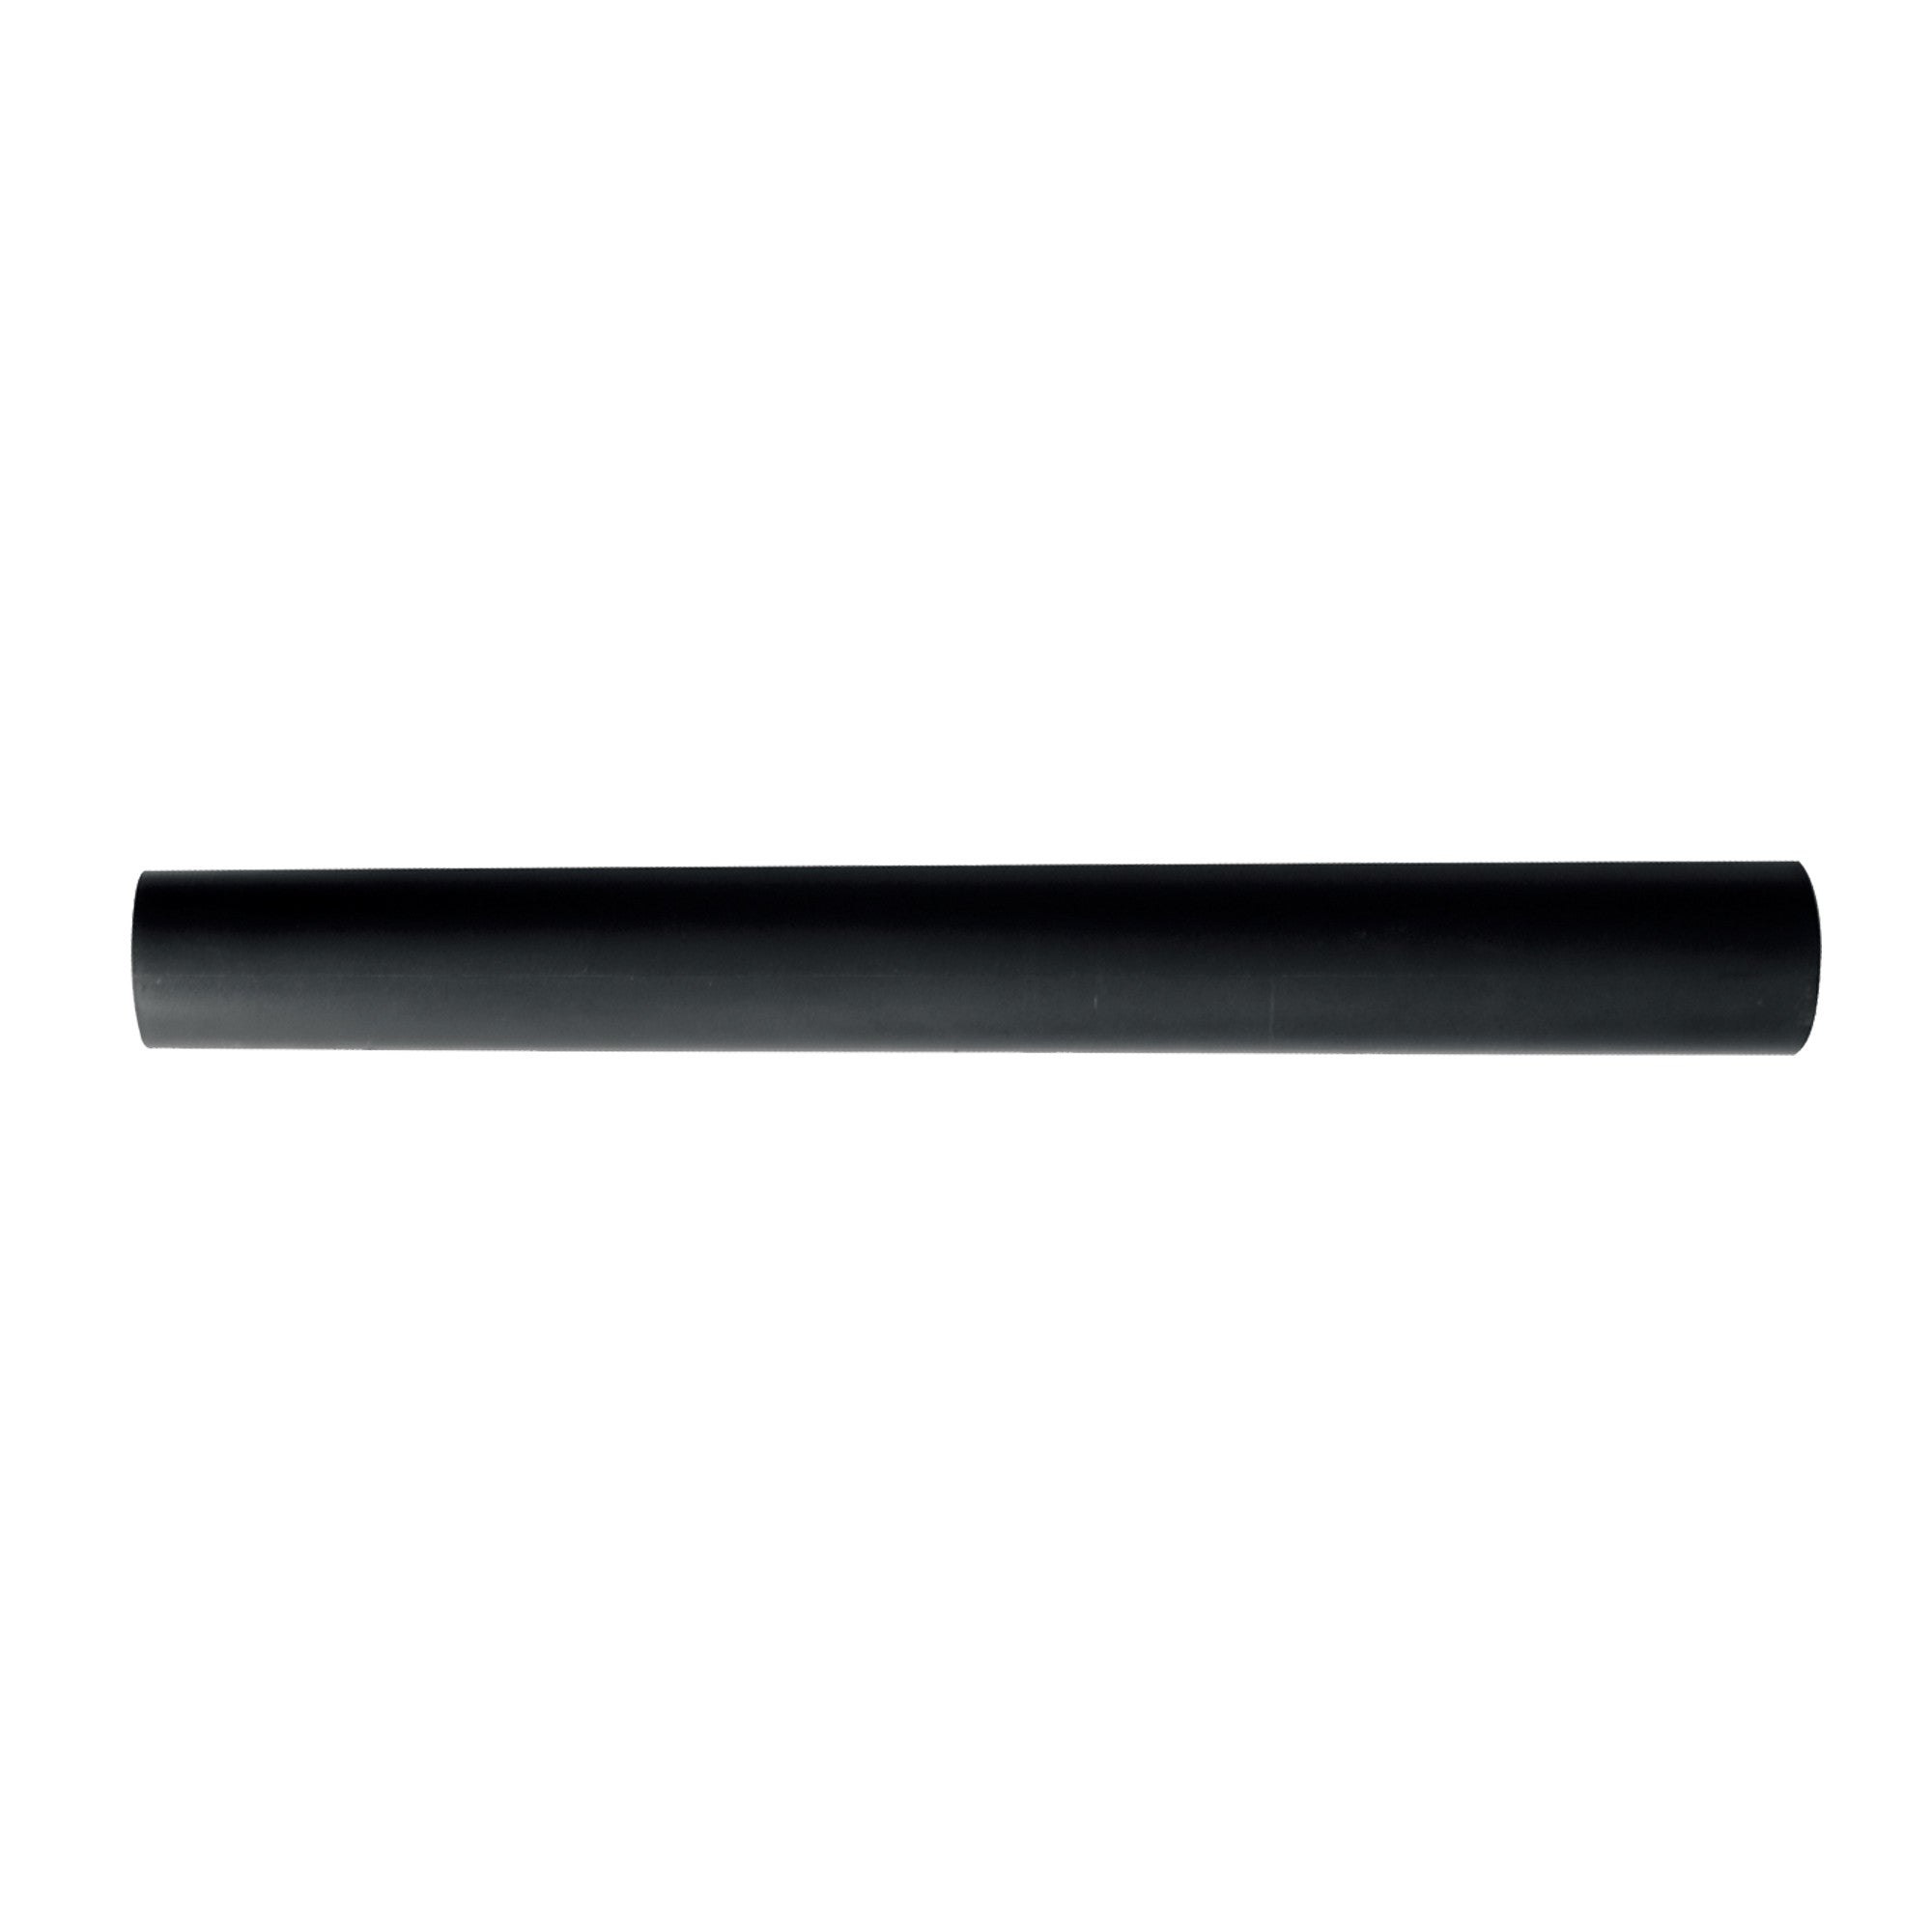 08-2502 Stanley 16" Extension Wand for Wet/Dry Vacuums with 2-1/2" Hose Diameter